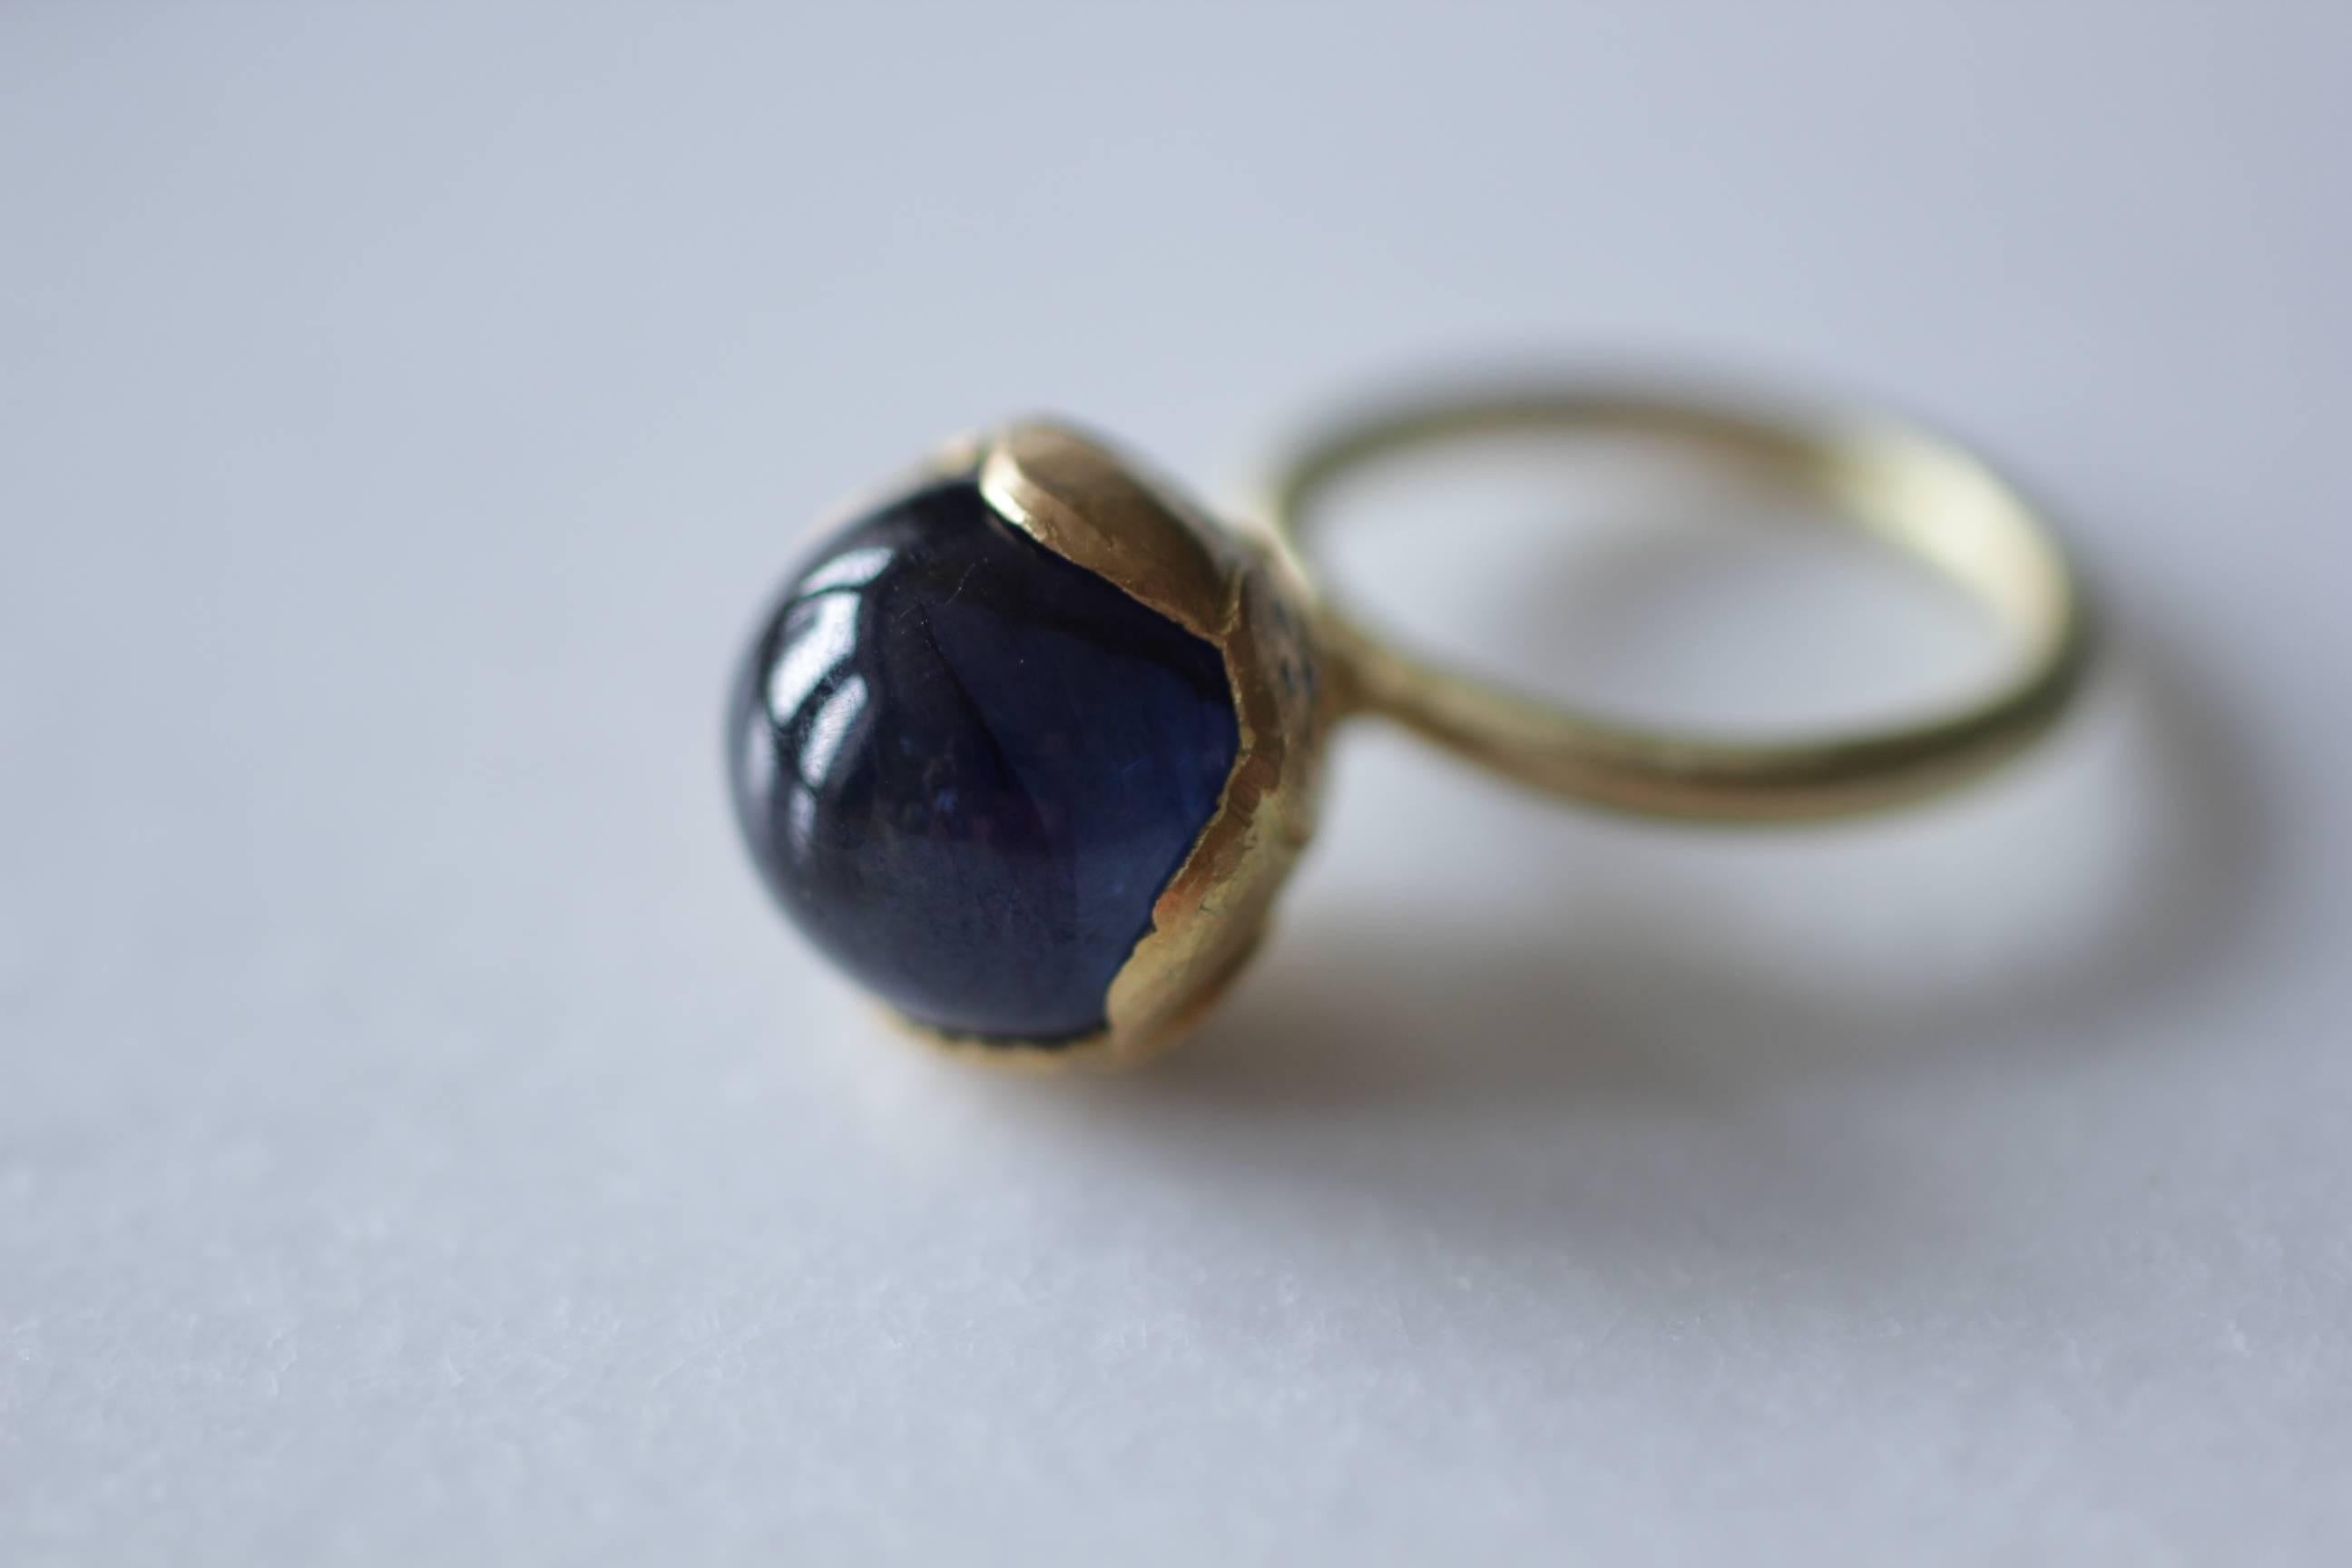 Lotus Flower Ring. An exotic stackable cocktail ring featuring Blue Sapphire Cabochon dome set in a 21k solid gold bezel mounted on 18k solid gold rounded shank. The bottom of the bezel is decoratively set with blue and black diamonds. This ring is